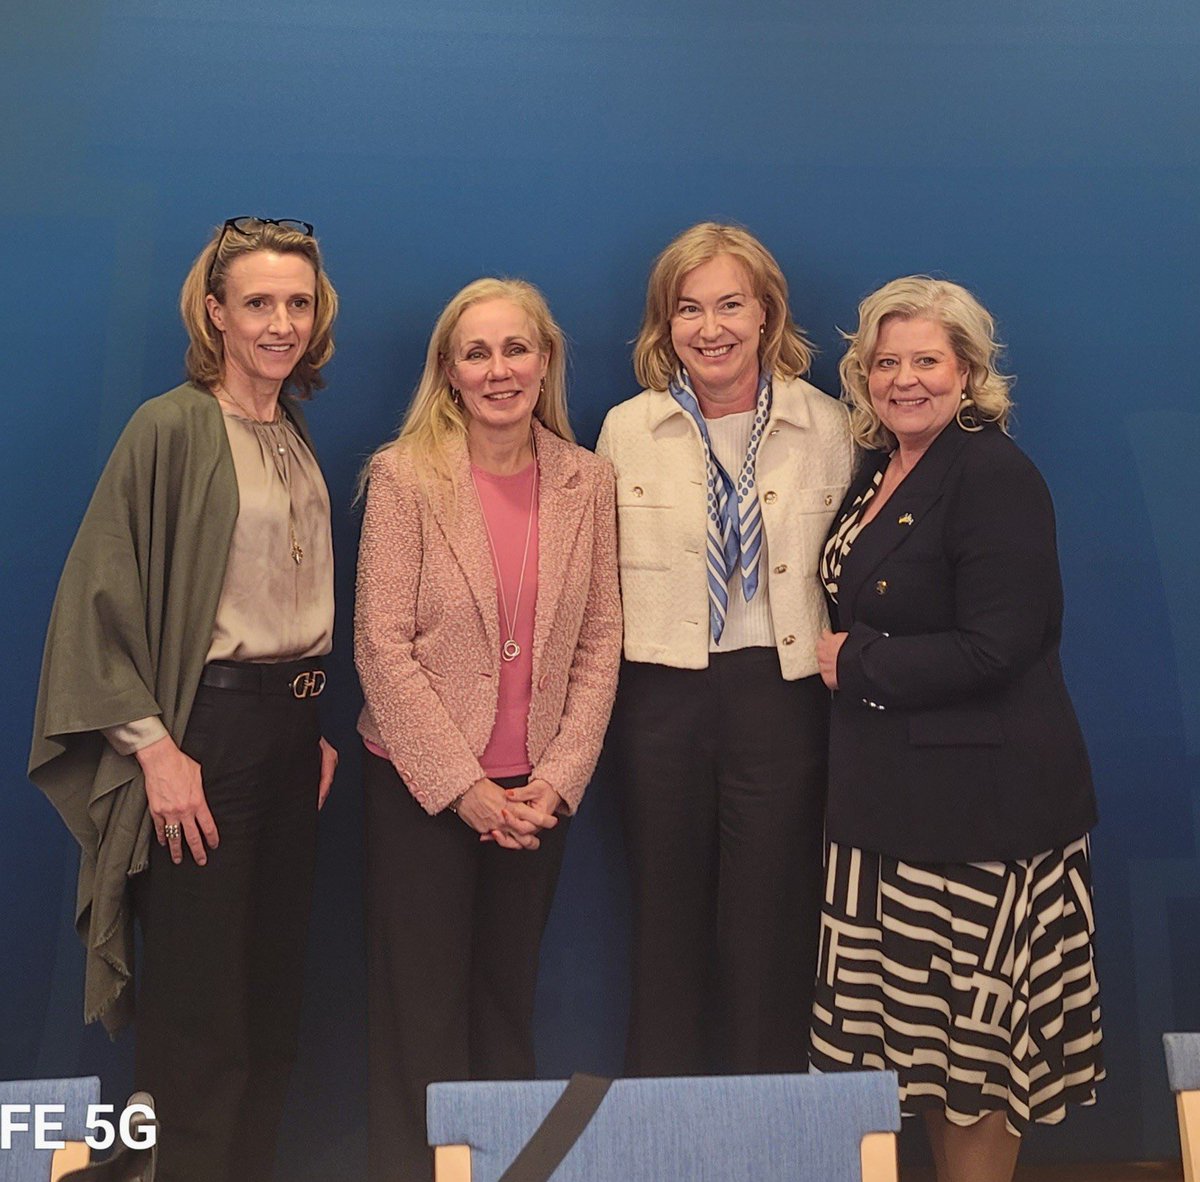 Grateful to Minister Gronvall for a productive meeting today. Sweden’s unwavering support to child rights globally is invaluable. Together, we are continuing to support the children of #Ukraine through impactful interventions. #ForEveryChild.